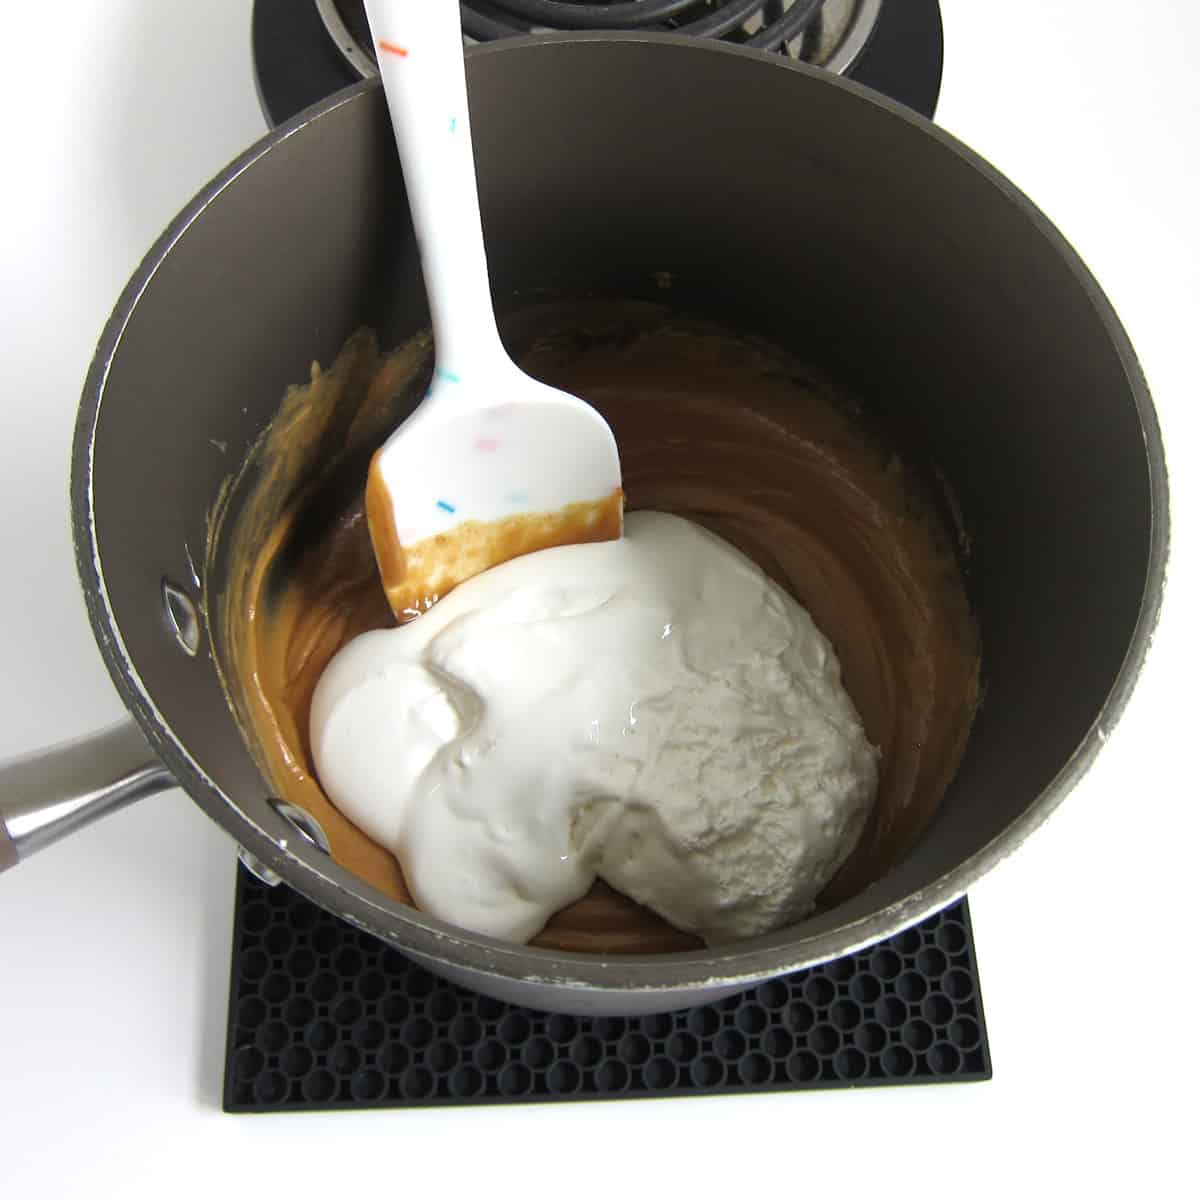 add marshmallow fluff to the melted peanut butter and corn syrup.